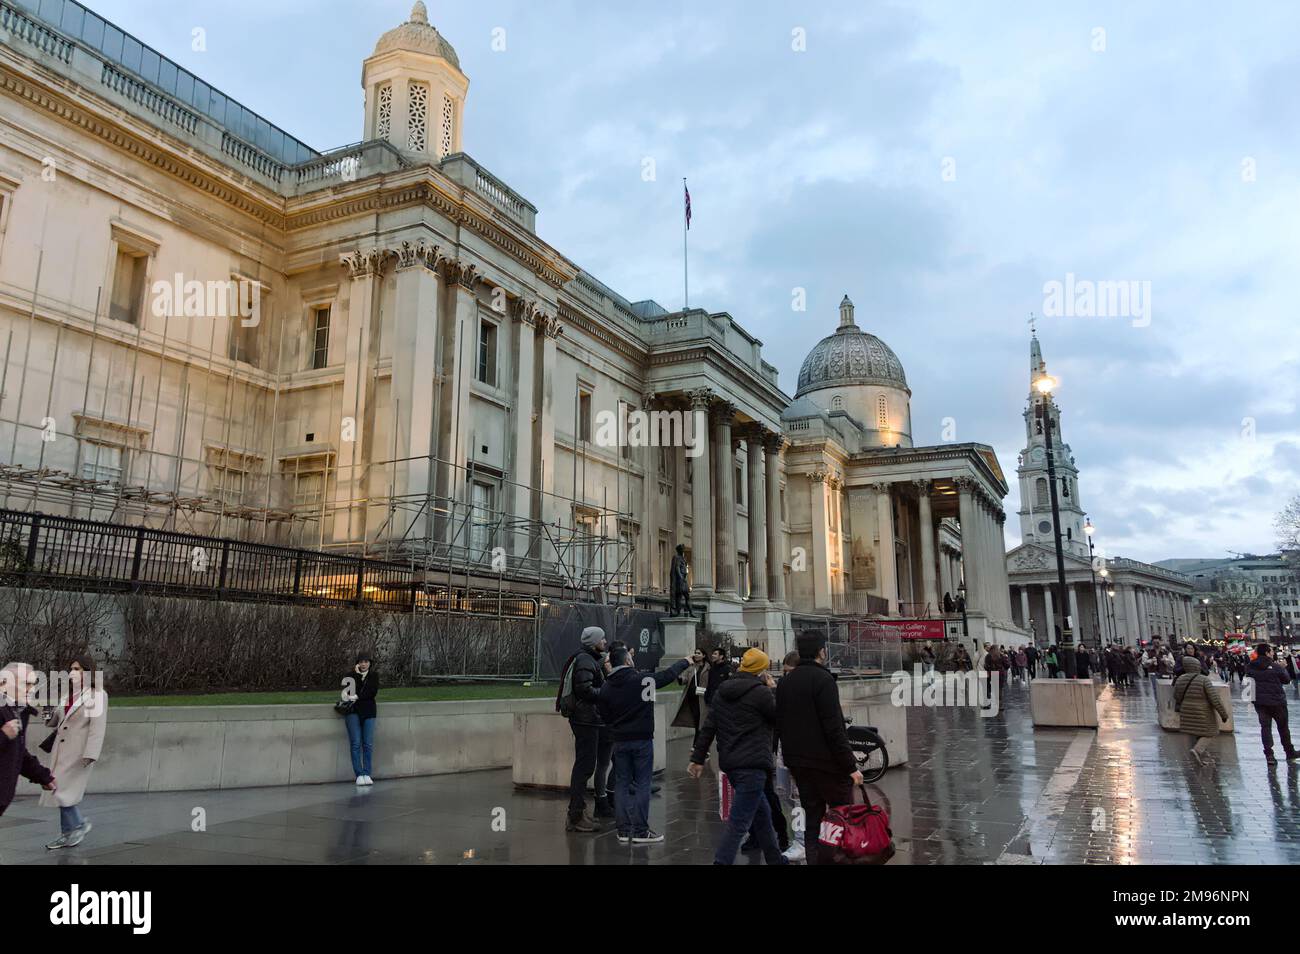 The National Gallery illuminated at sundown with people walking by on Trafalgar Square, Stock Photo